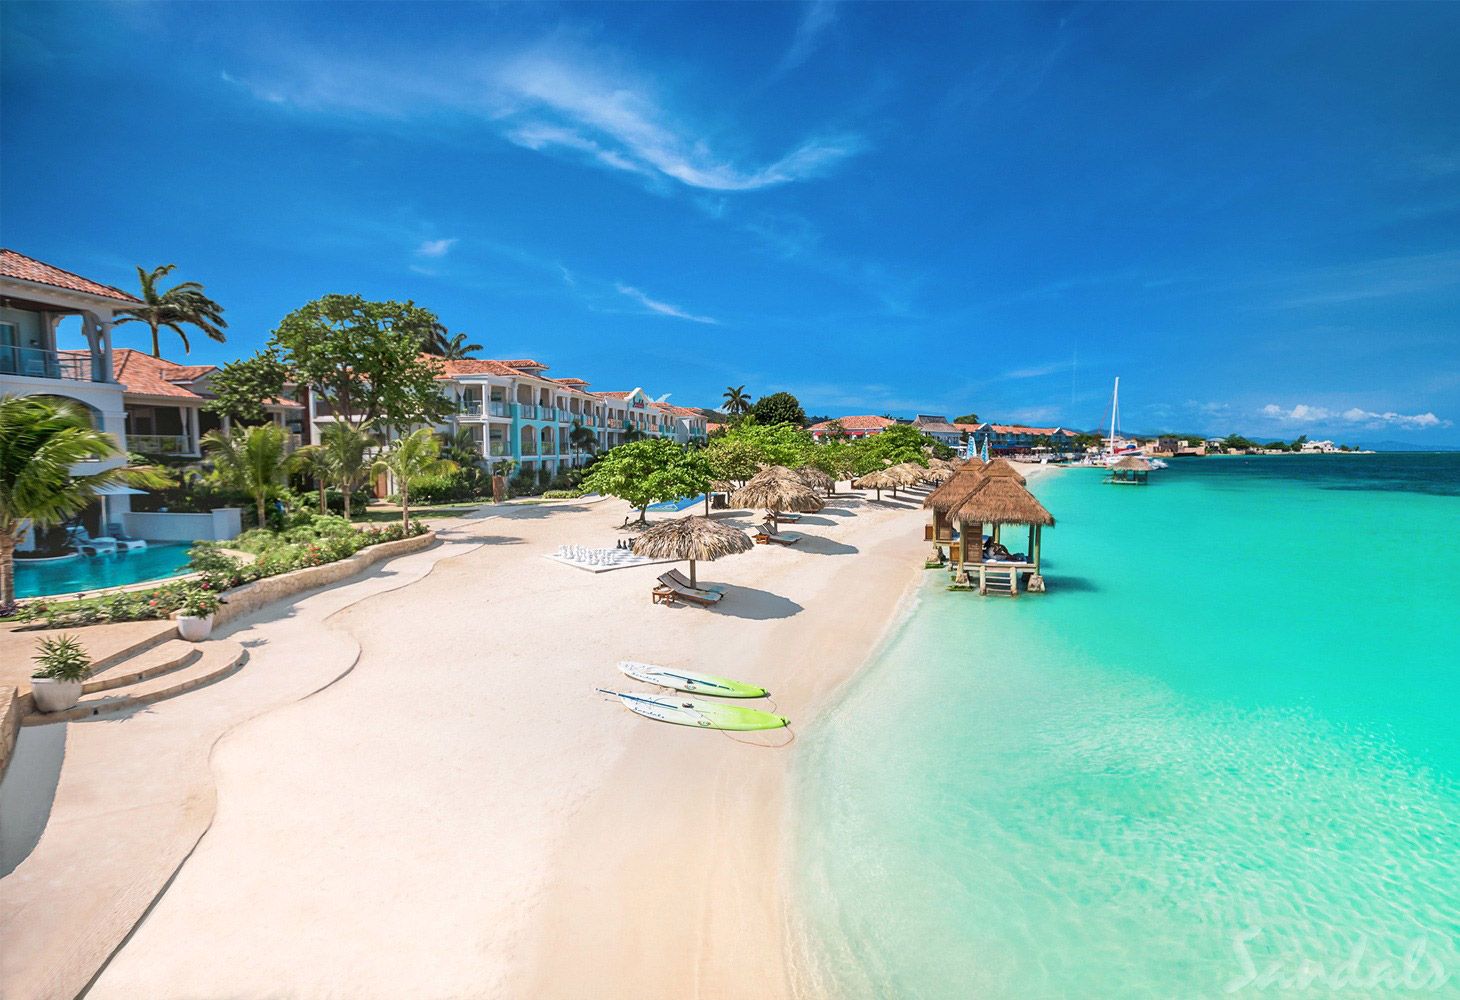 Best Sandals Resort 2021 Which Sandals Resort Is Best For You? The Complete Guide.